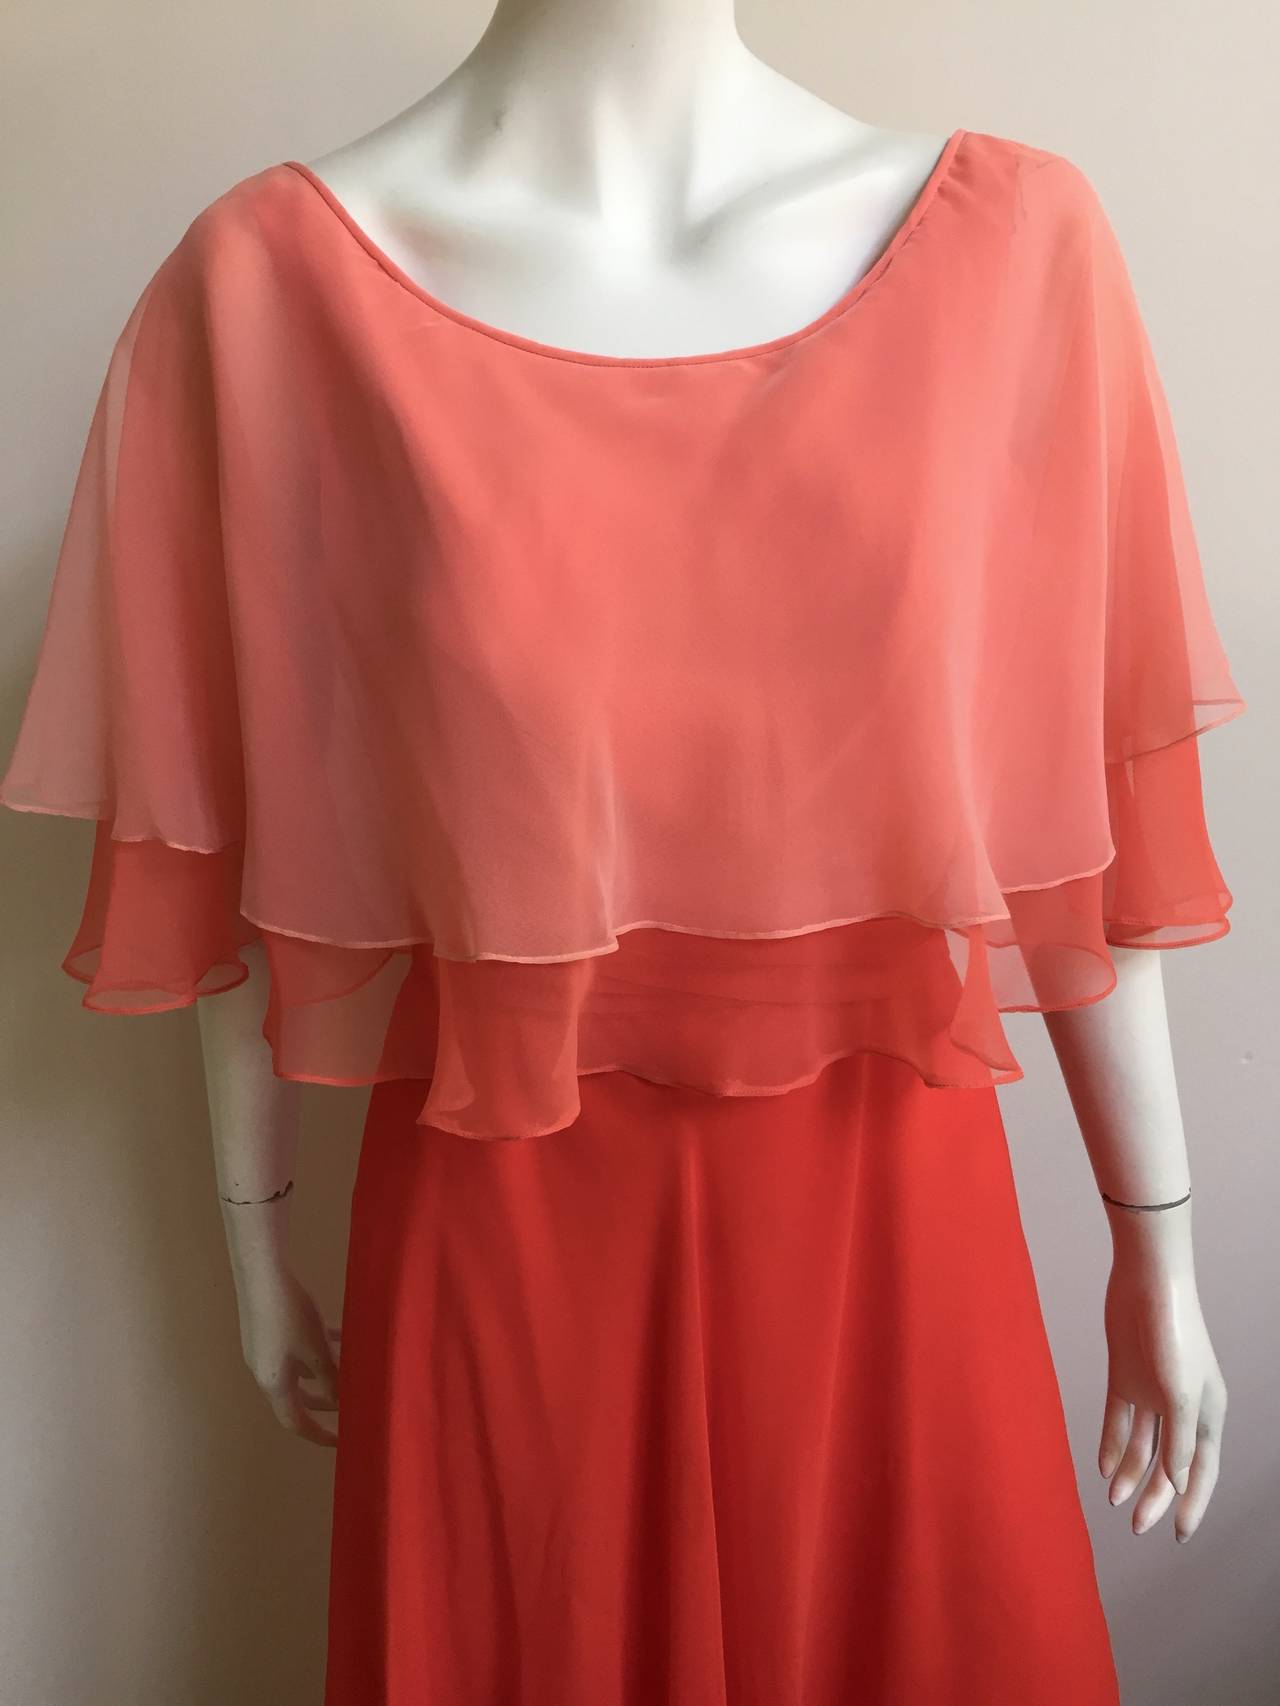 Mollie Parnis 70s Silk Chiffon Gown Size 6. For Sale at 1stDibs